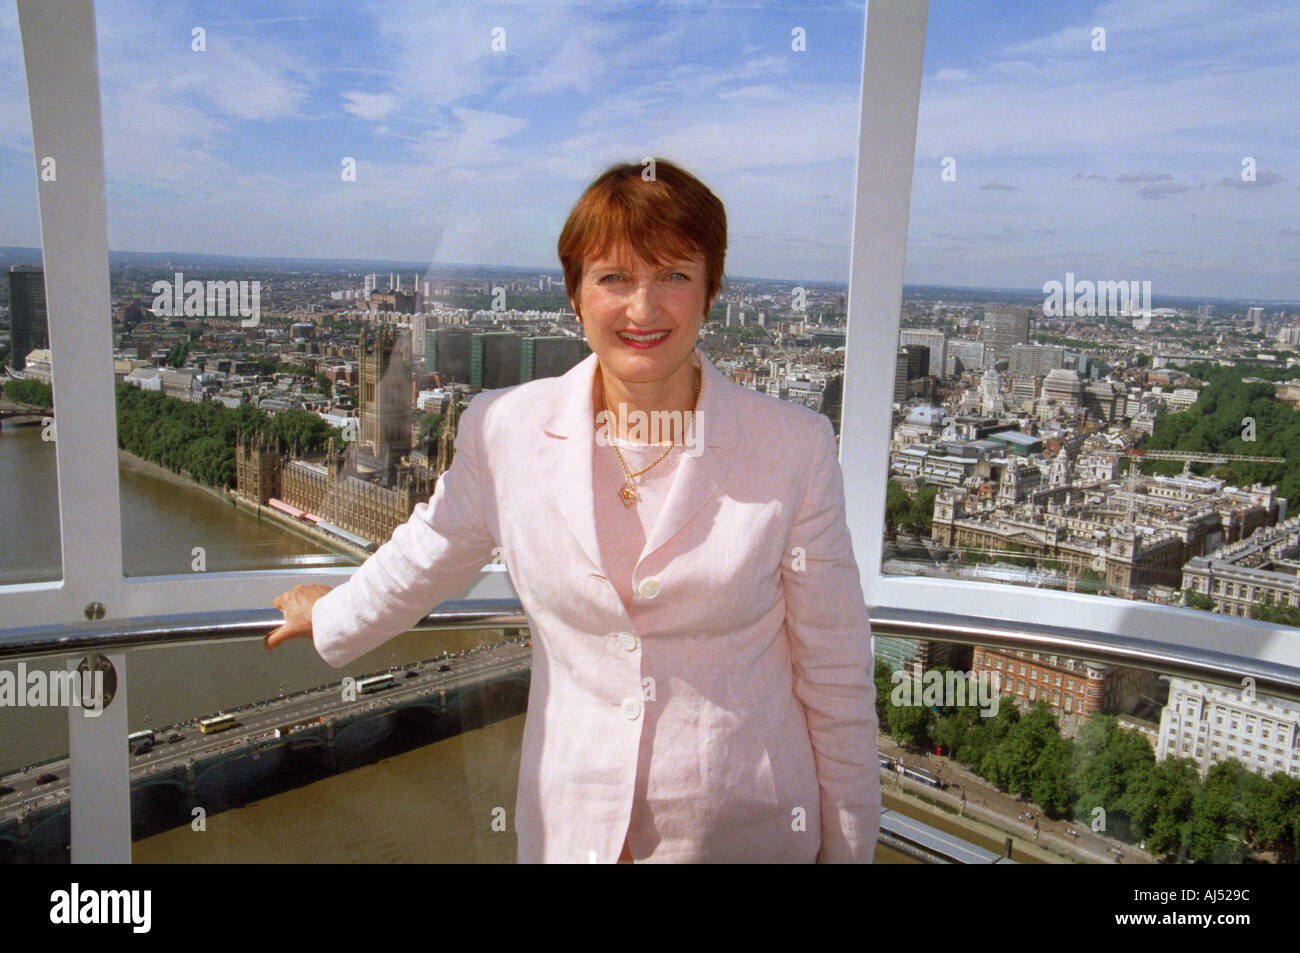 Tessa Jowell Labour MP for Dulwich West Norwood and Secretary of State for Culture On the London Eye Portrait May 2003 Stock Photo